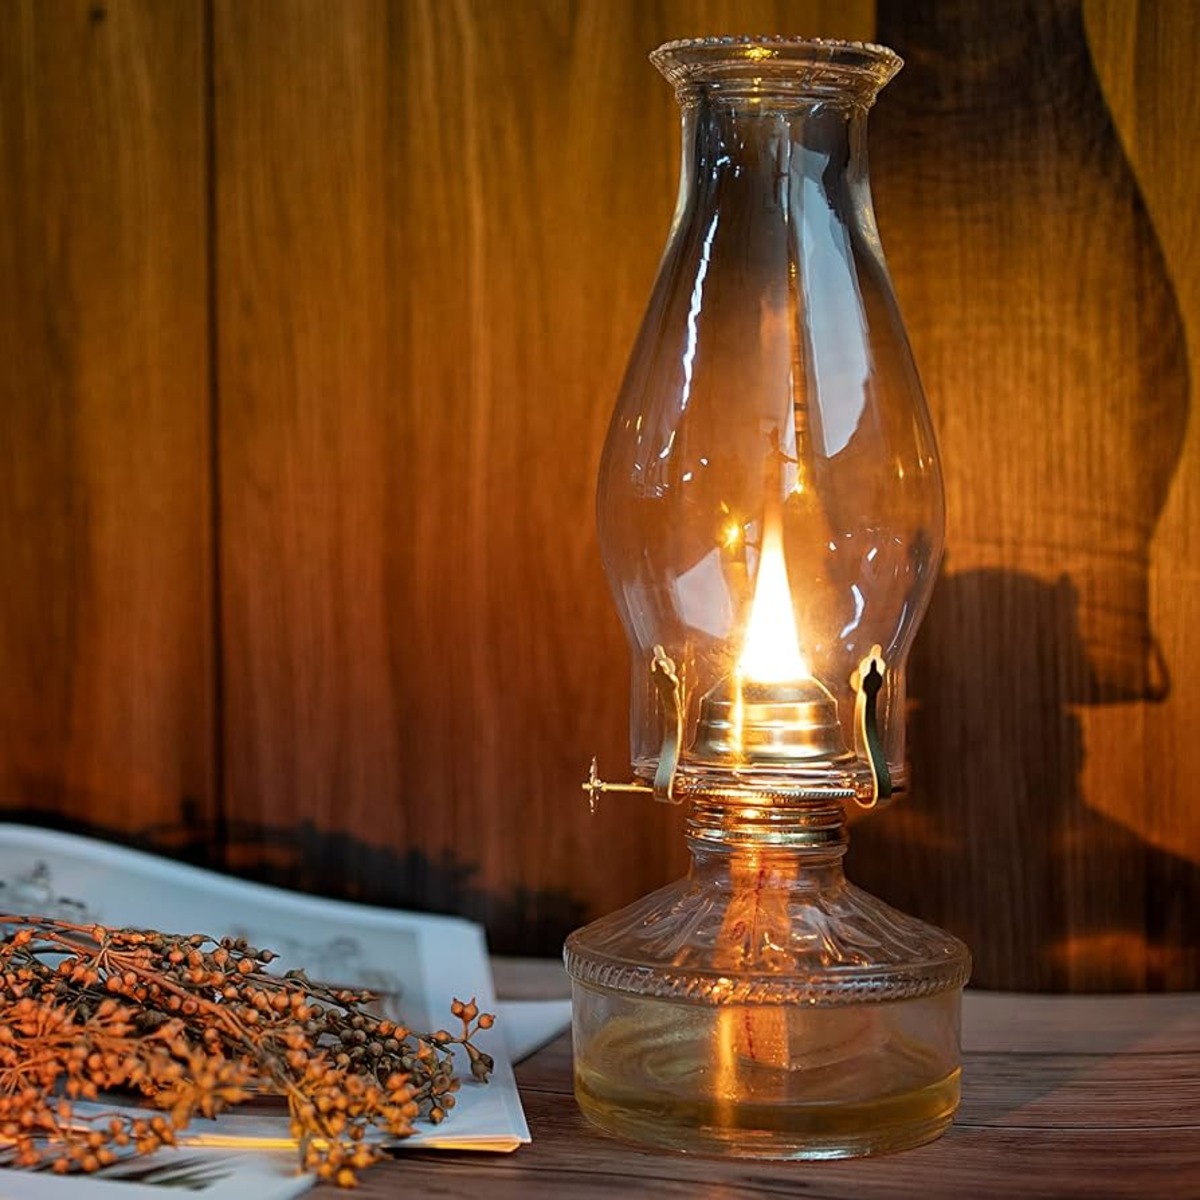 What Can I Use As A Wick For An Oil Lamp